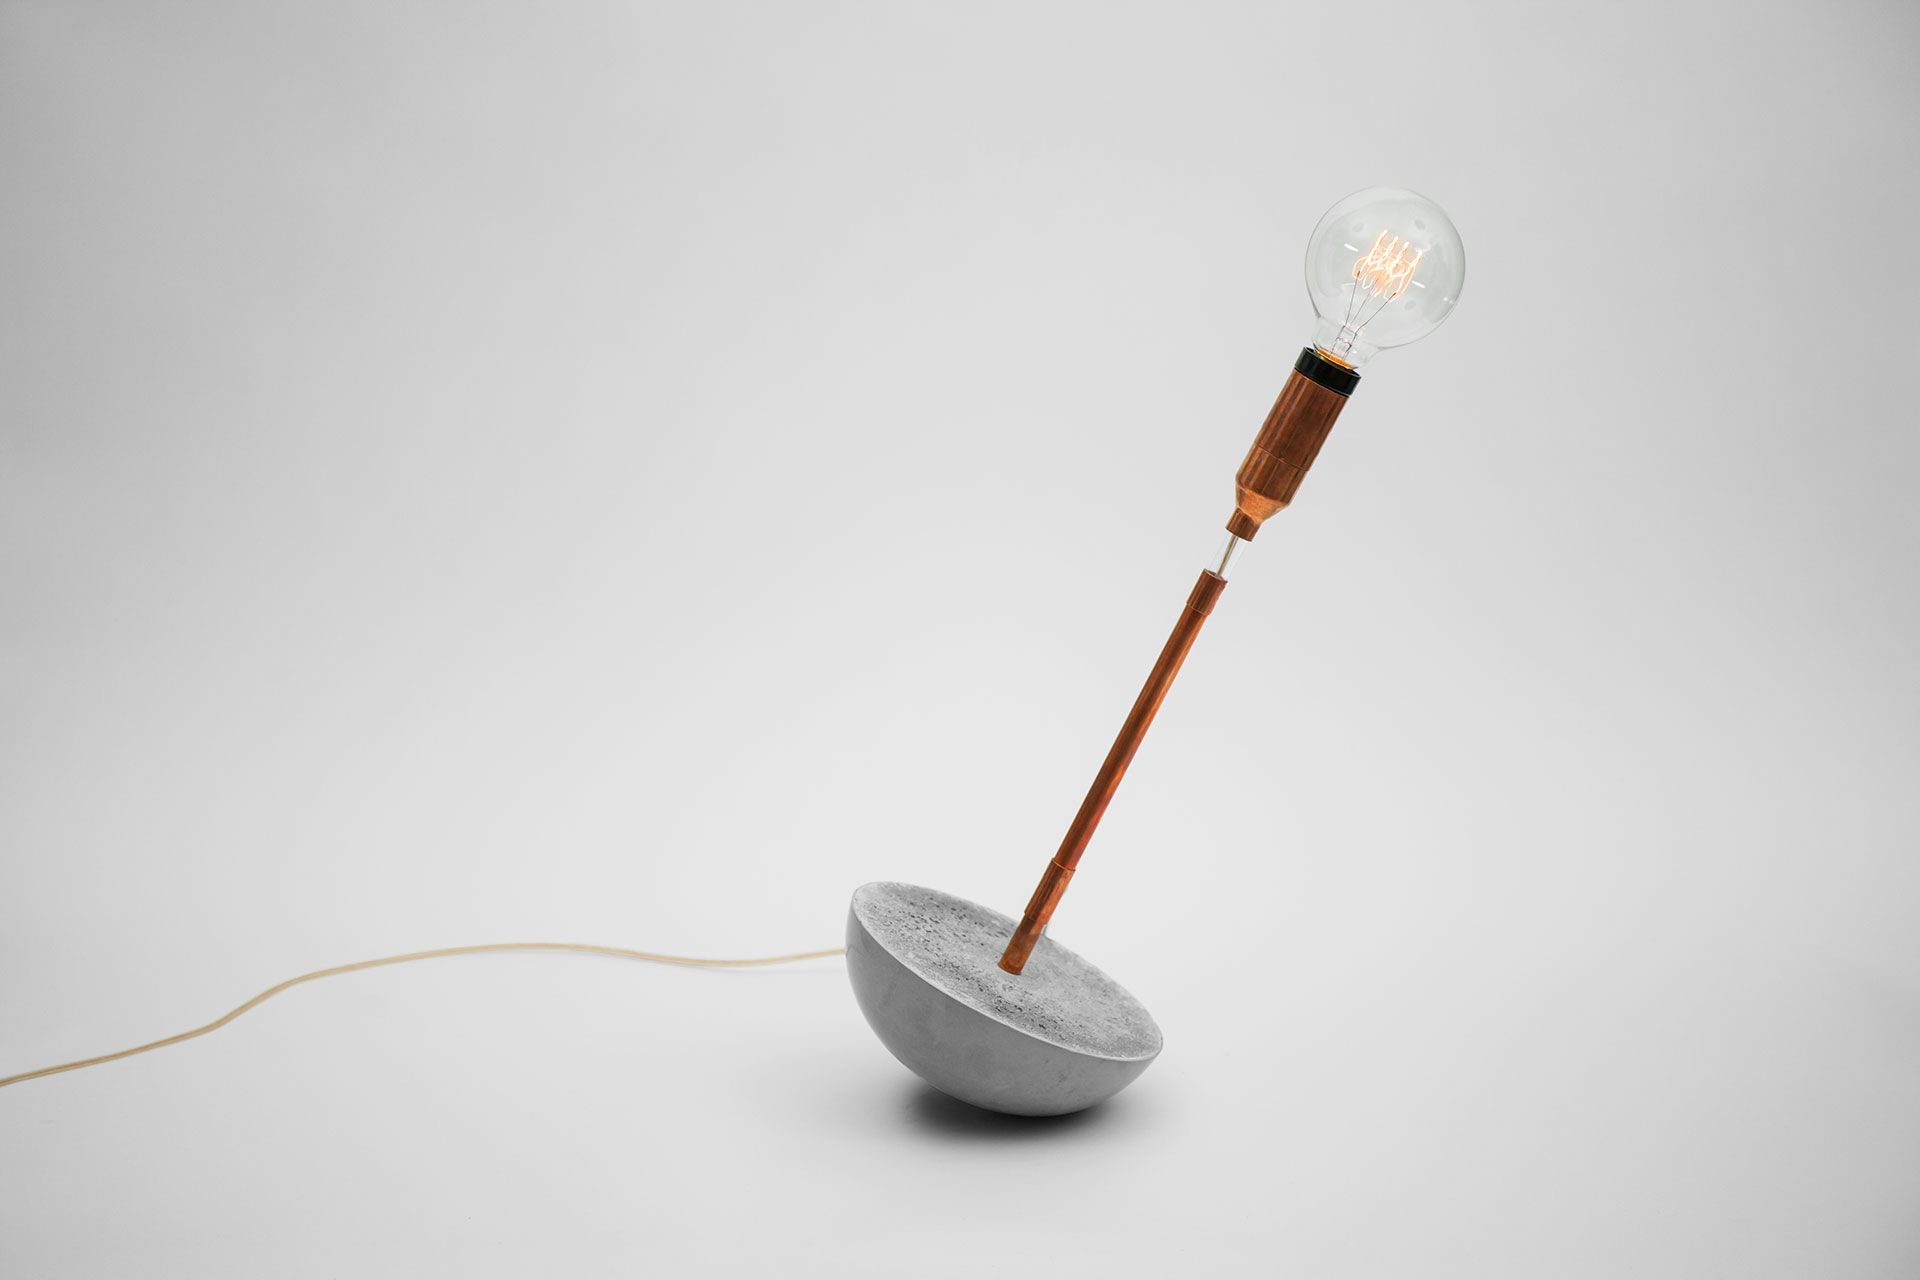 Fun design table lamp with magic touch dimmer and concrete base inspired by soviet era roly-poly toy